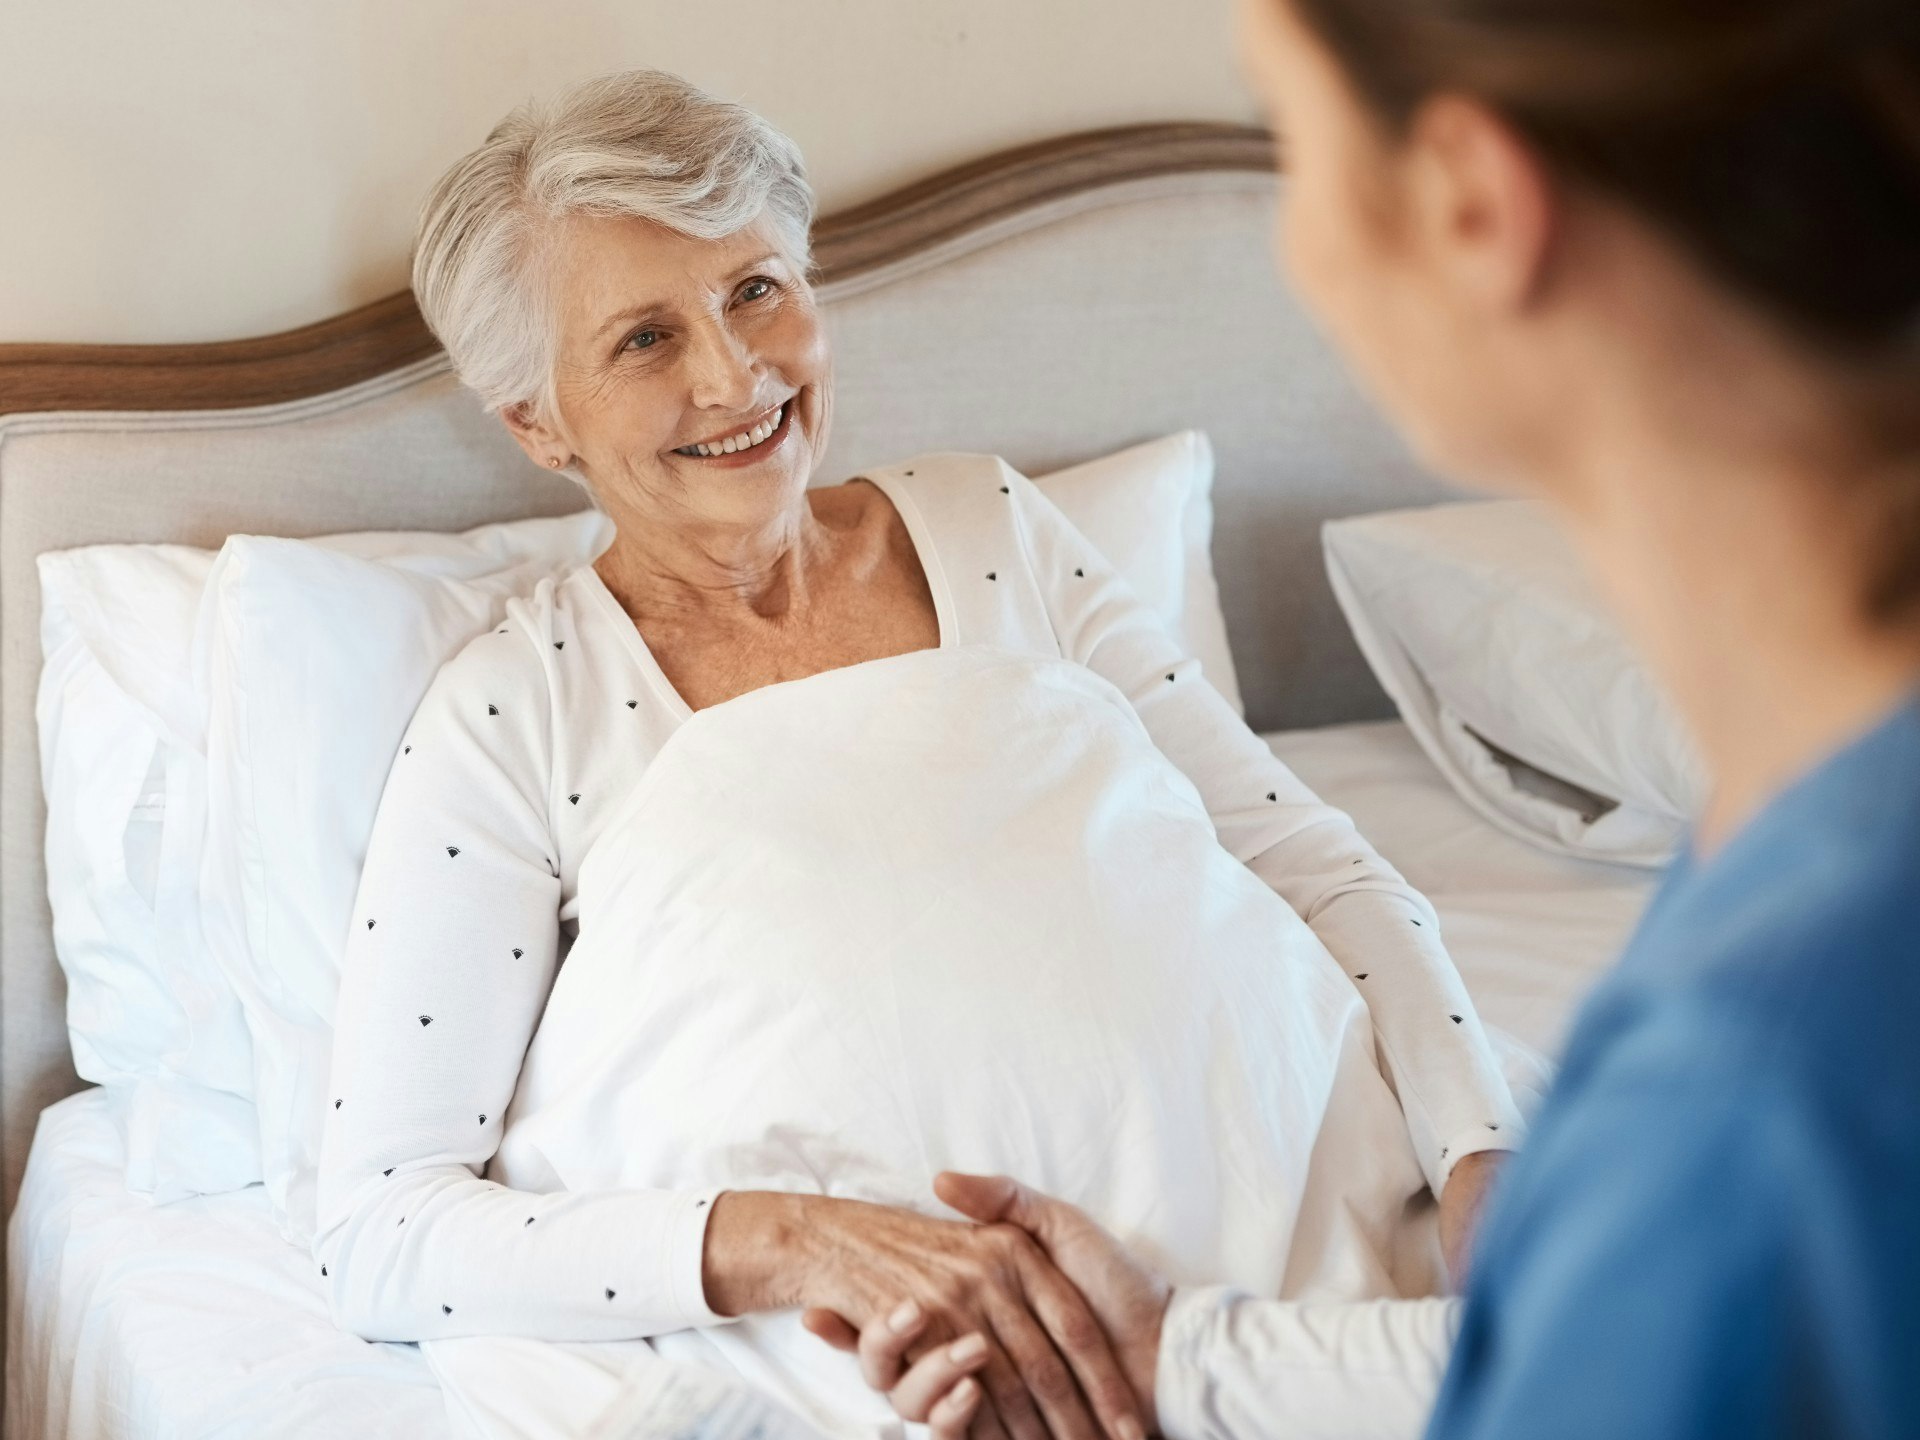 <p>Respite is aiming to provide you and your carer with a break while ensuring you are still receiving quality care over this time. [Source: iStock</p>
